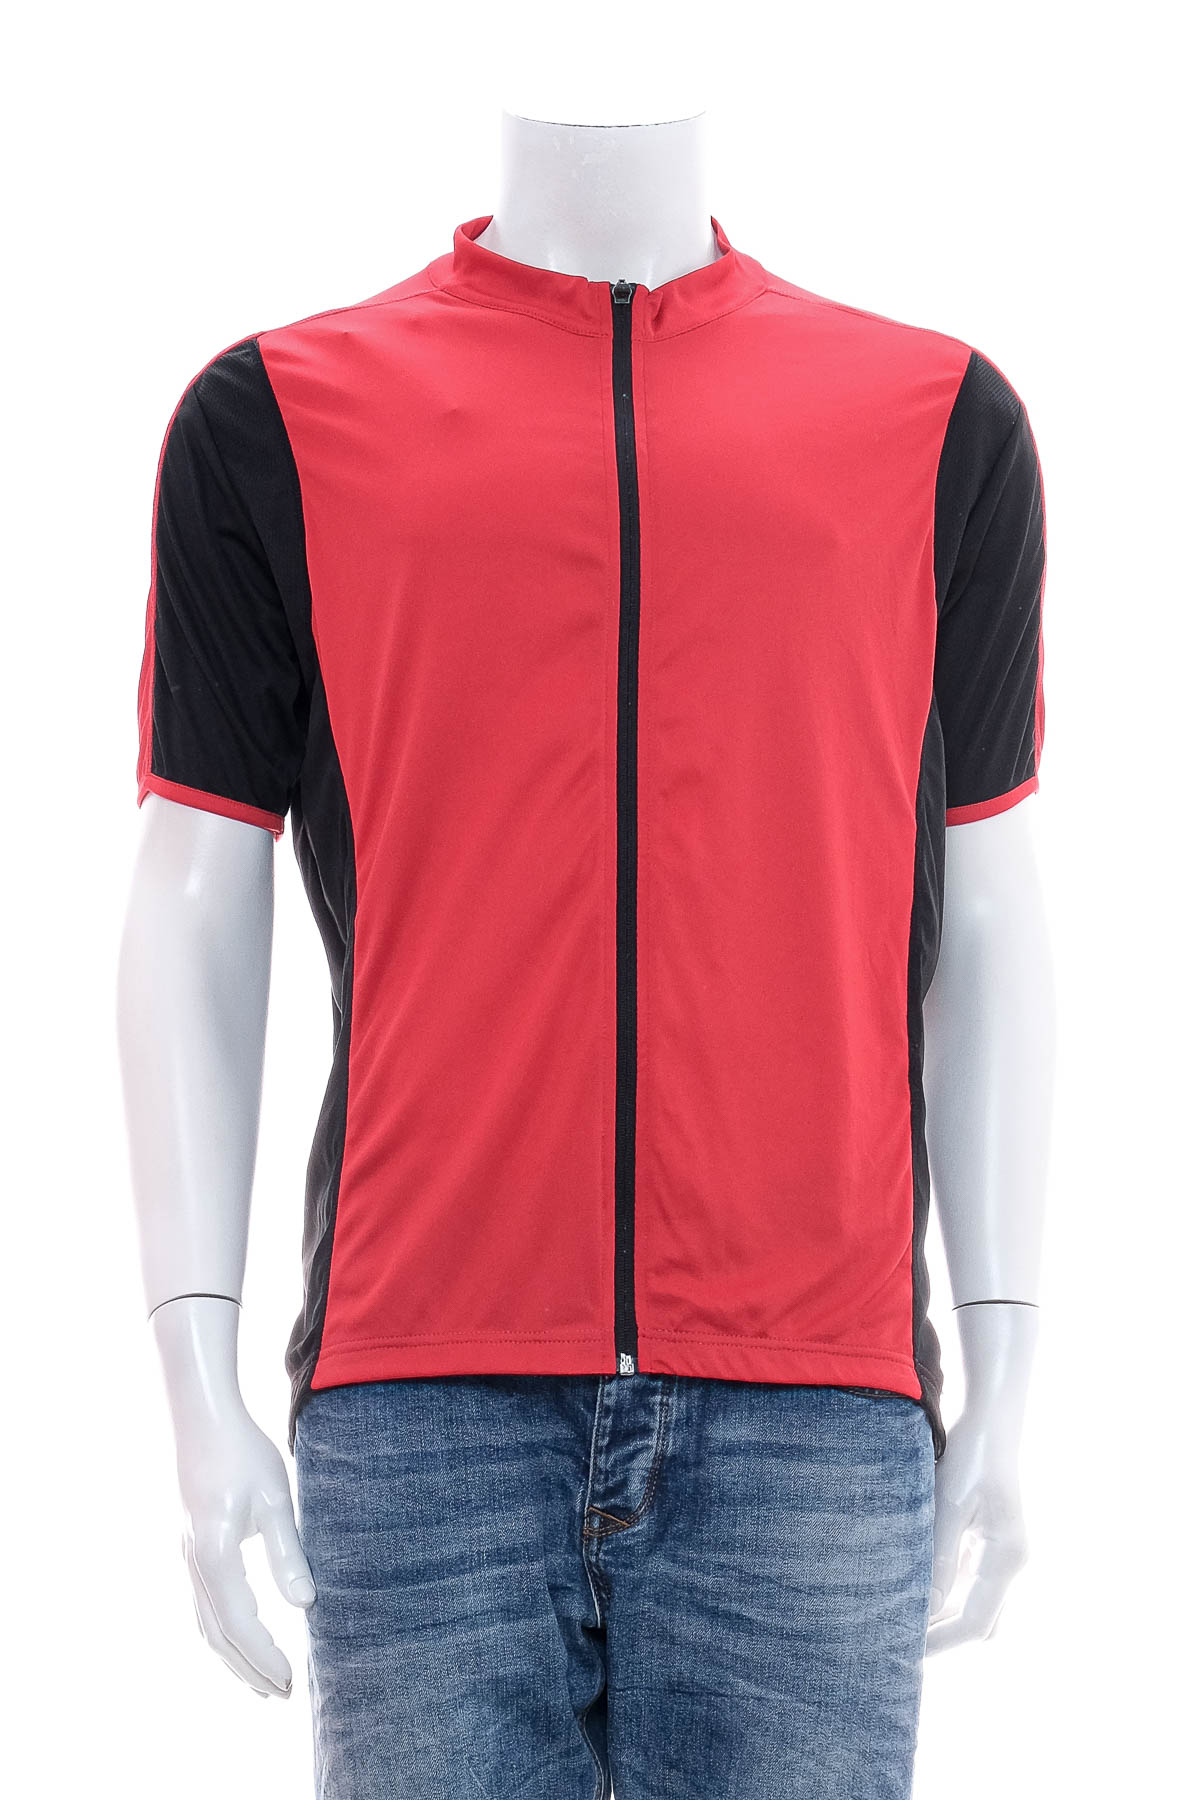 Male sports top for cycling - CMP BIKE - 0